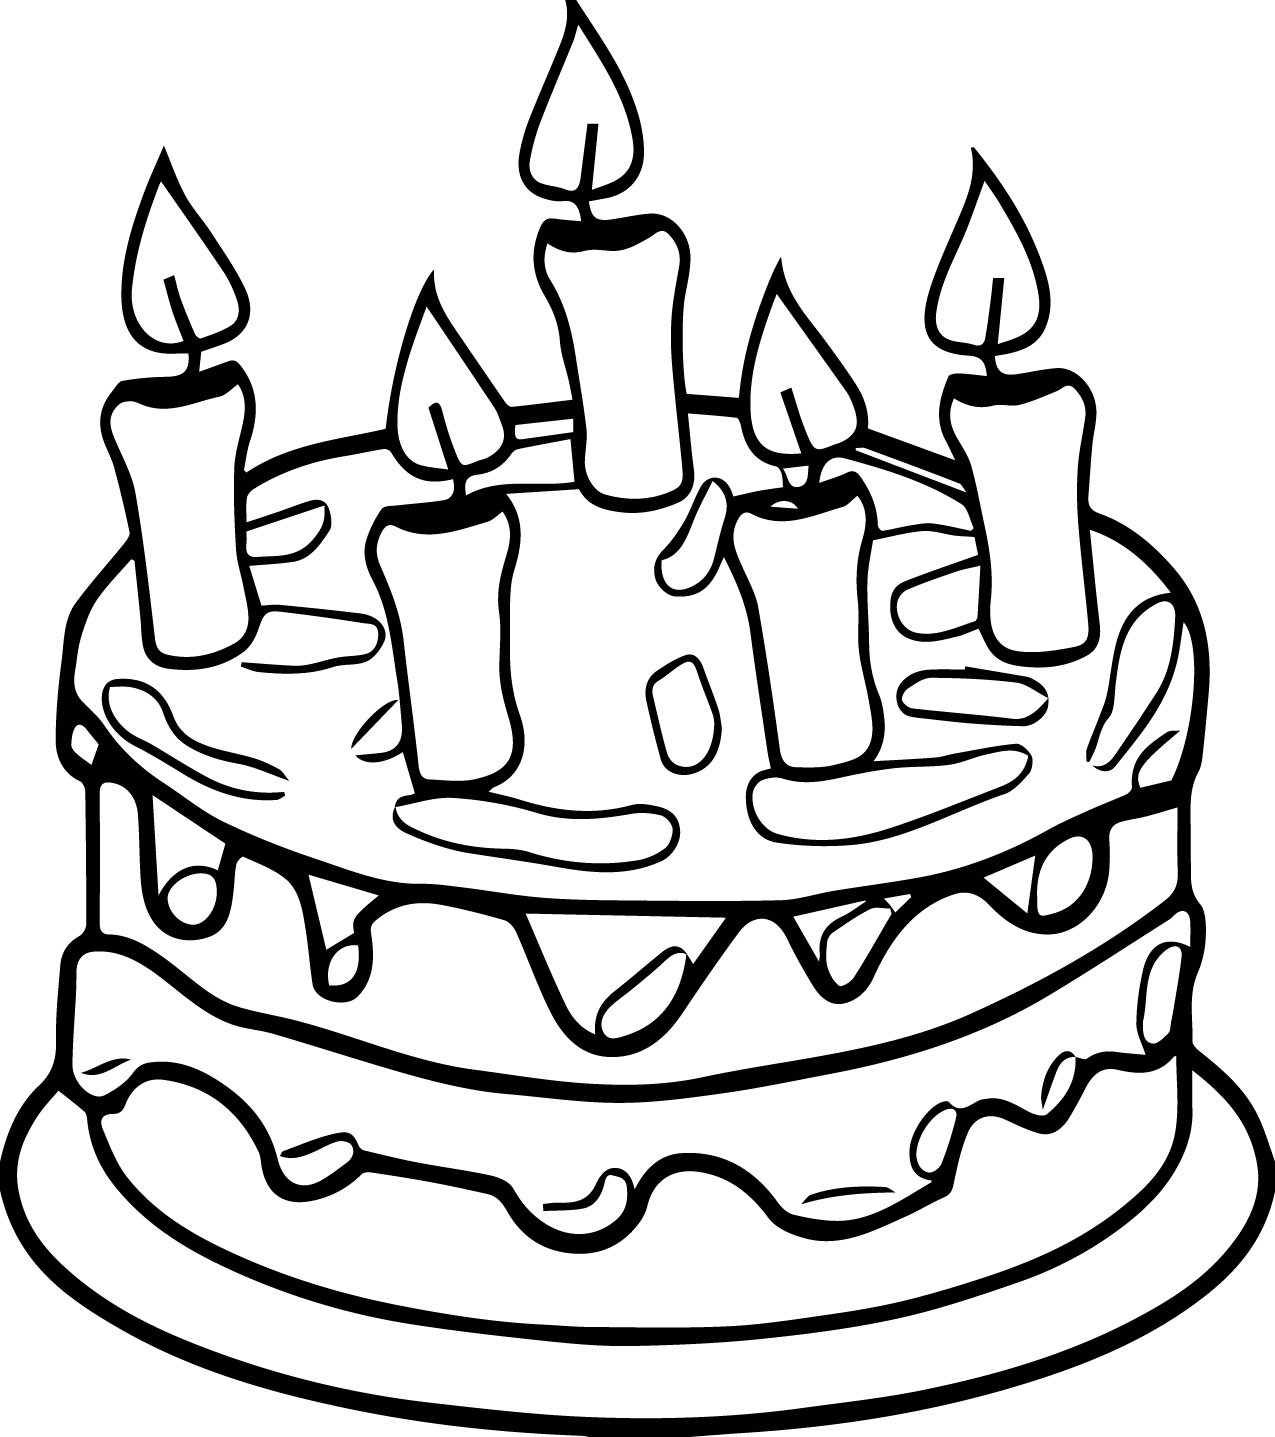 Birthday Cake Coloring Sheet. 7th birthday cake coloring page for ...